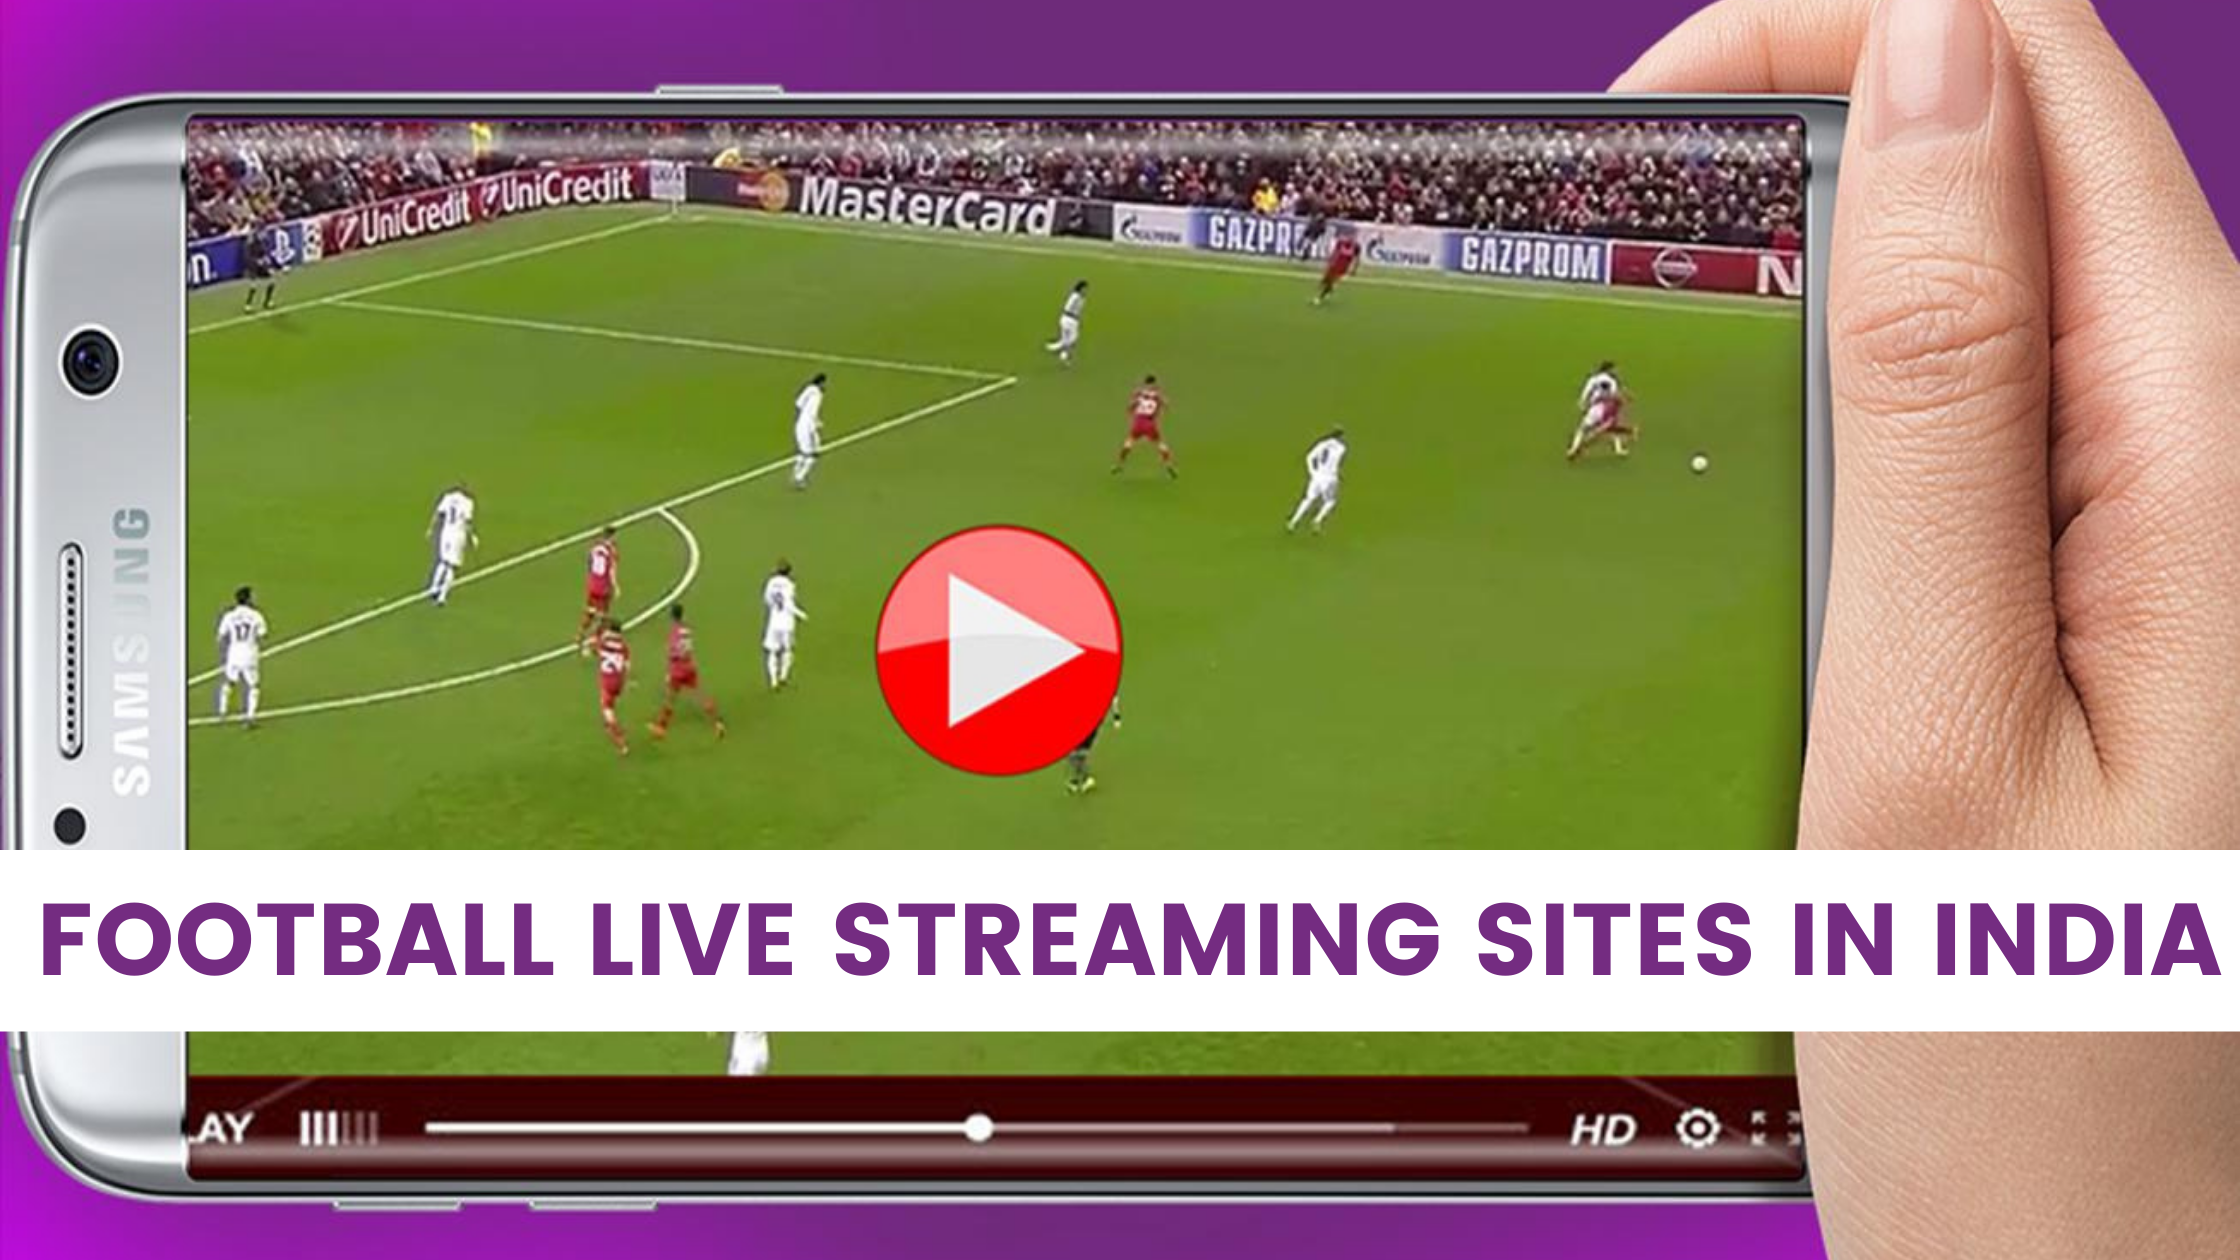 How to Stream Football Live in India?